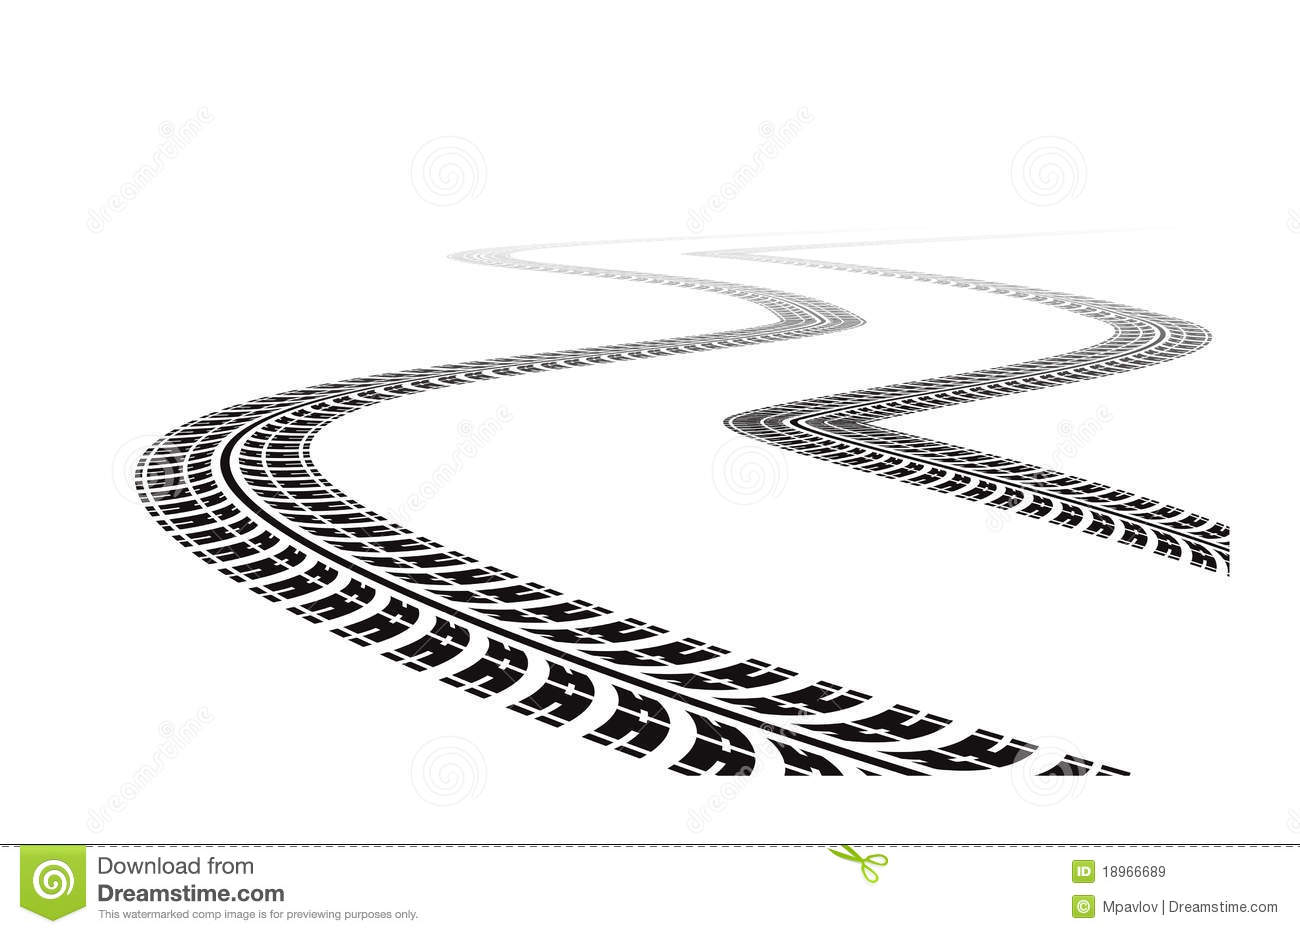 Tire Tracks In Perspective View  Vector Illustration Isolated On White